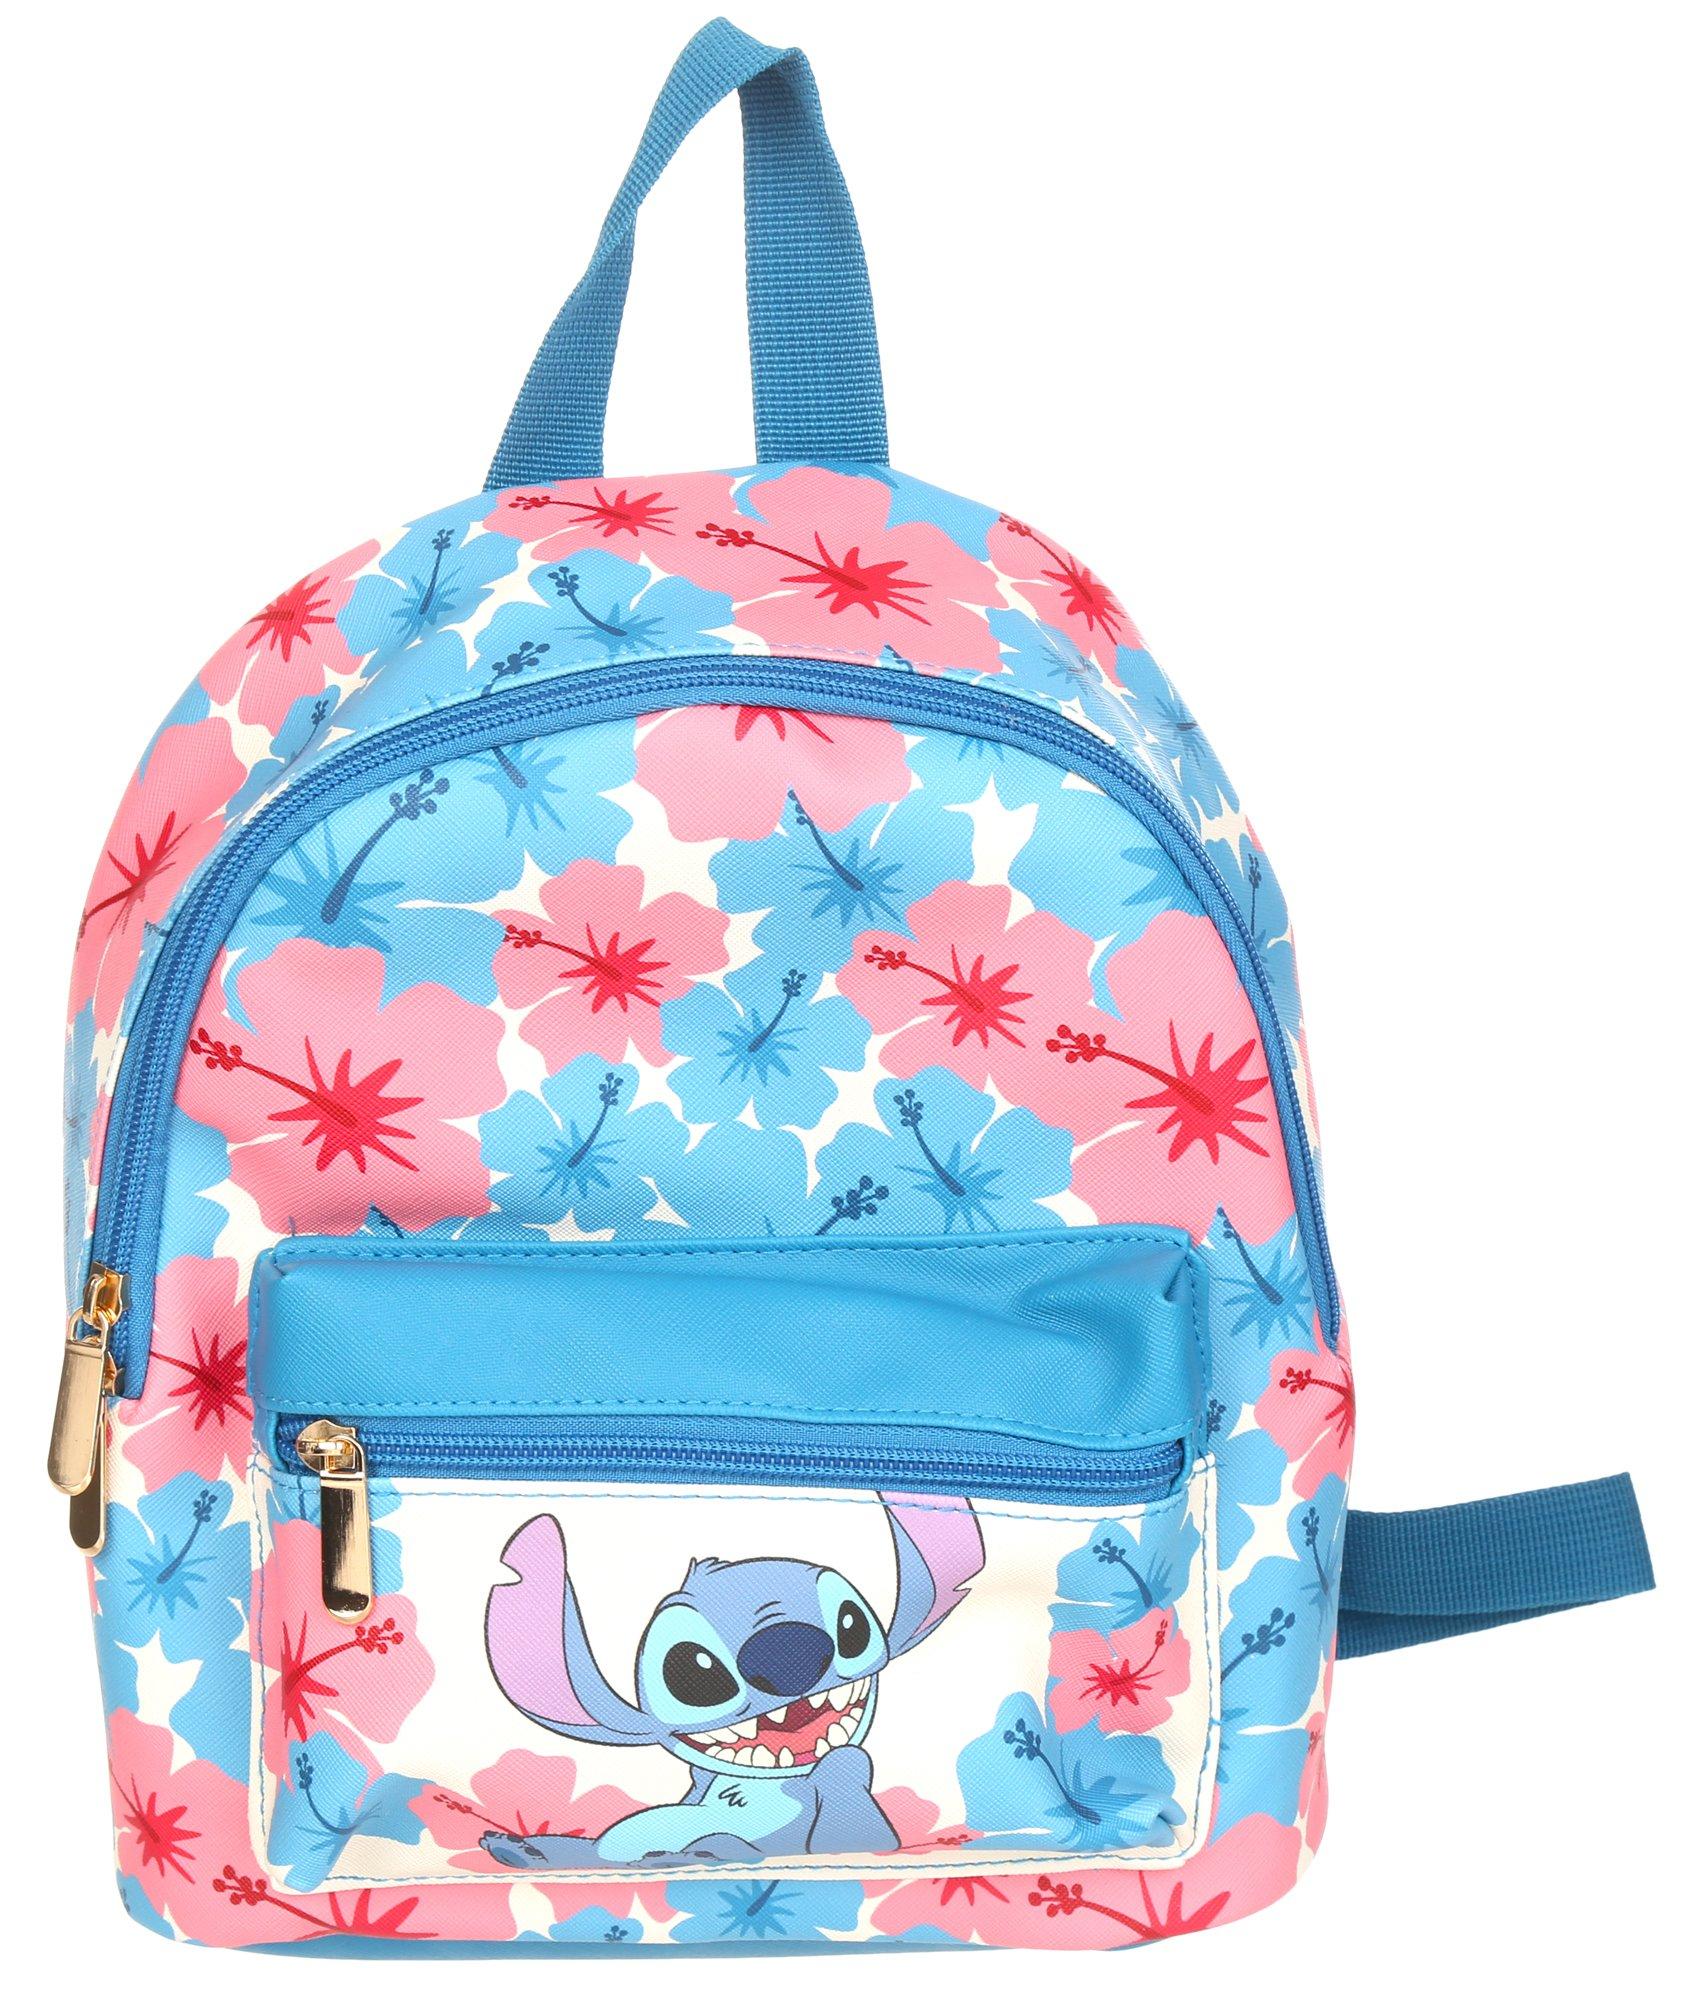 Floral Stitch Faux Leather Fashion Backpack